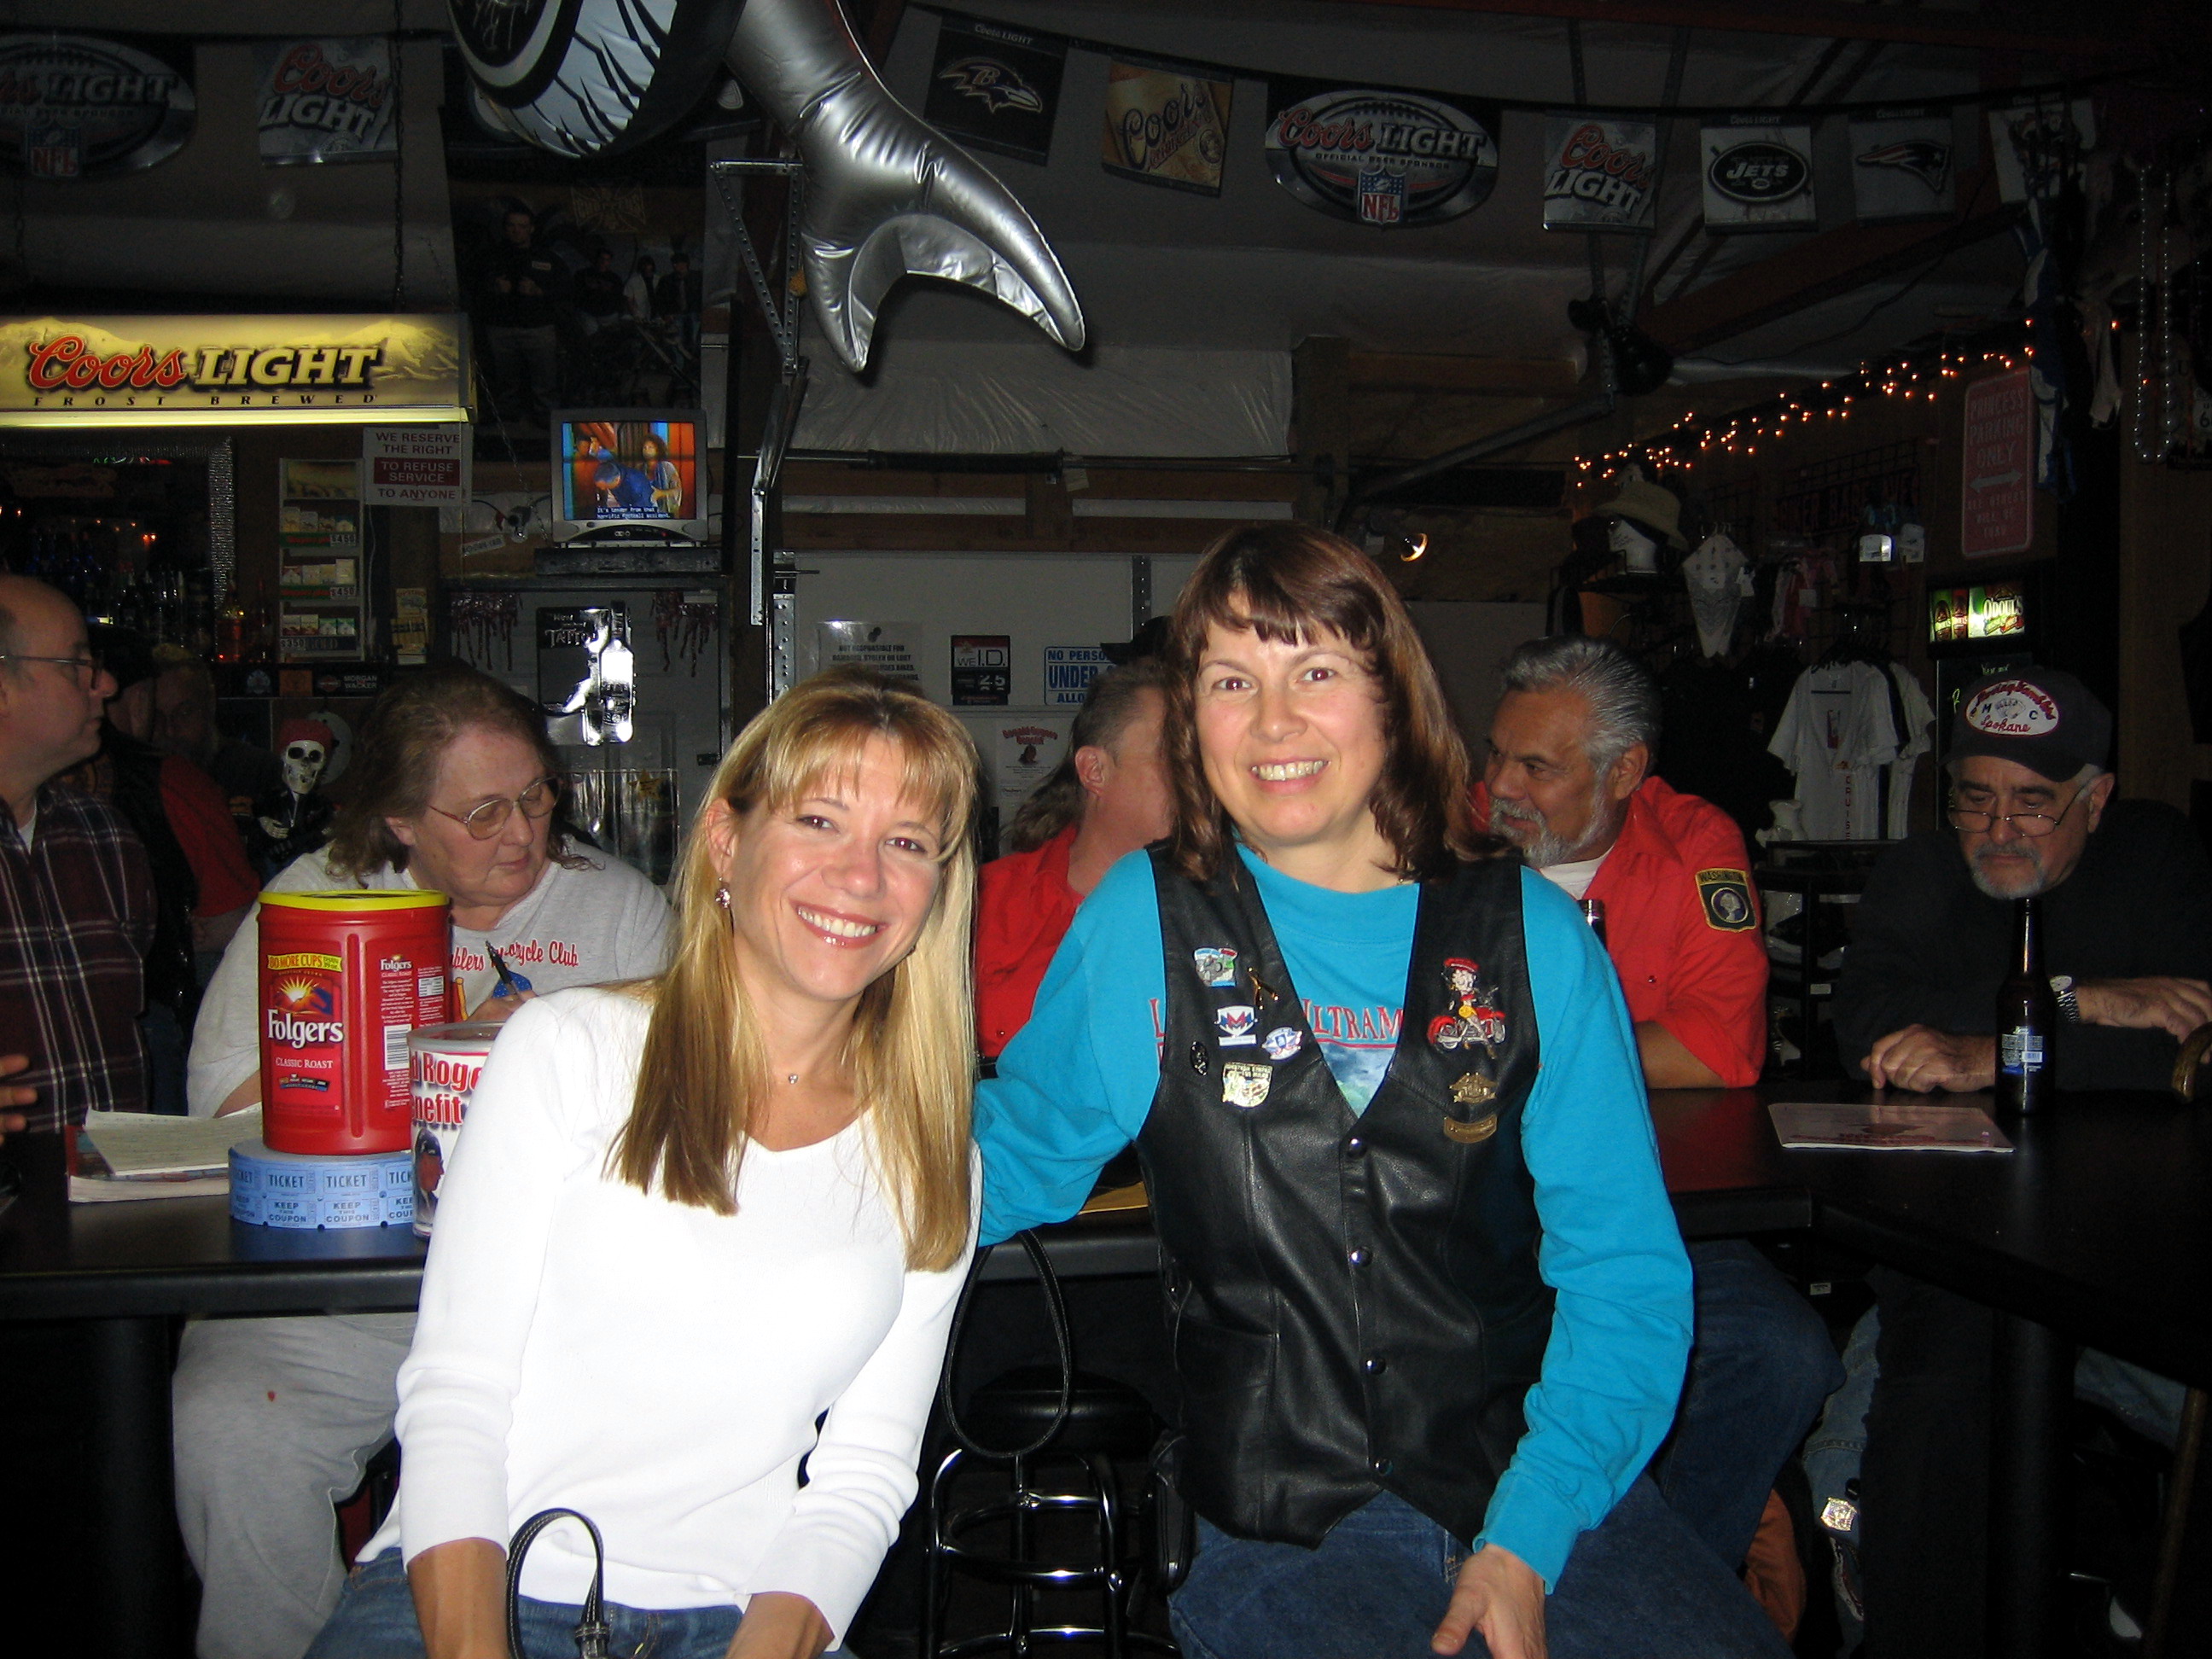 Me & Connie at a benefit for Ron who helped us train for WS by driving us up Mt. Spokane many times just so we could run down